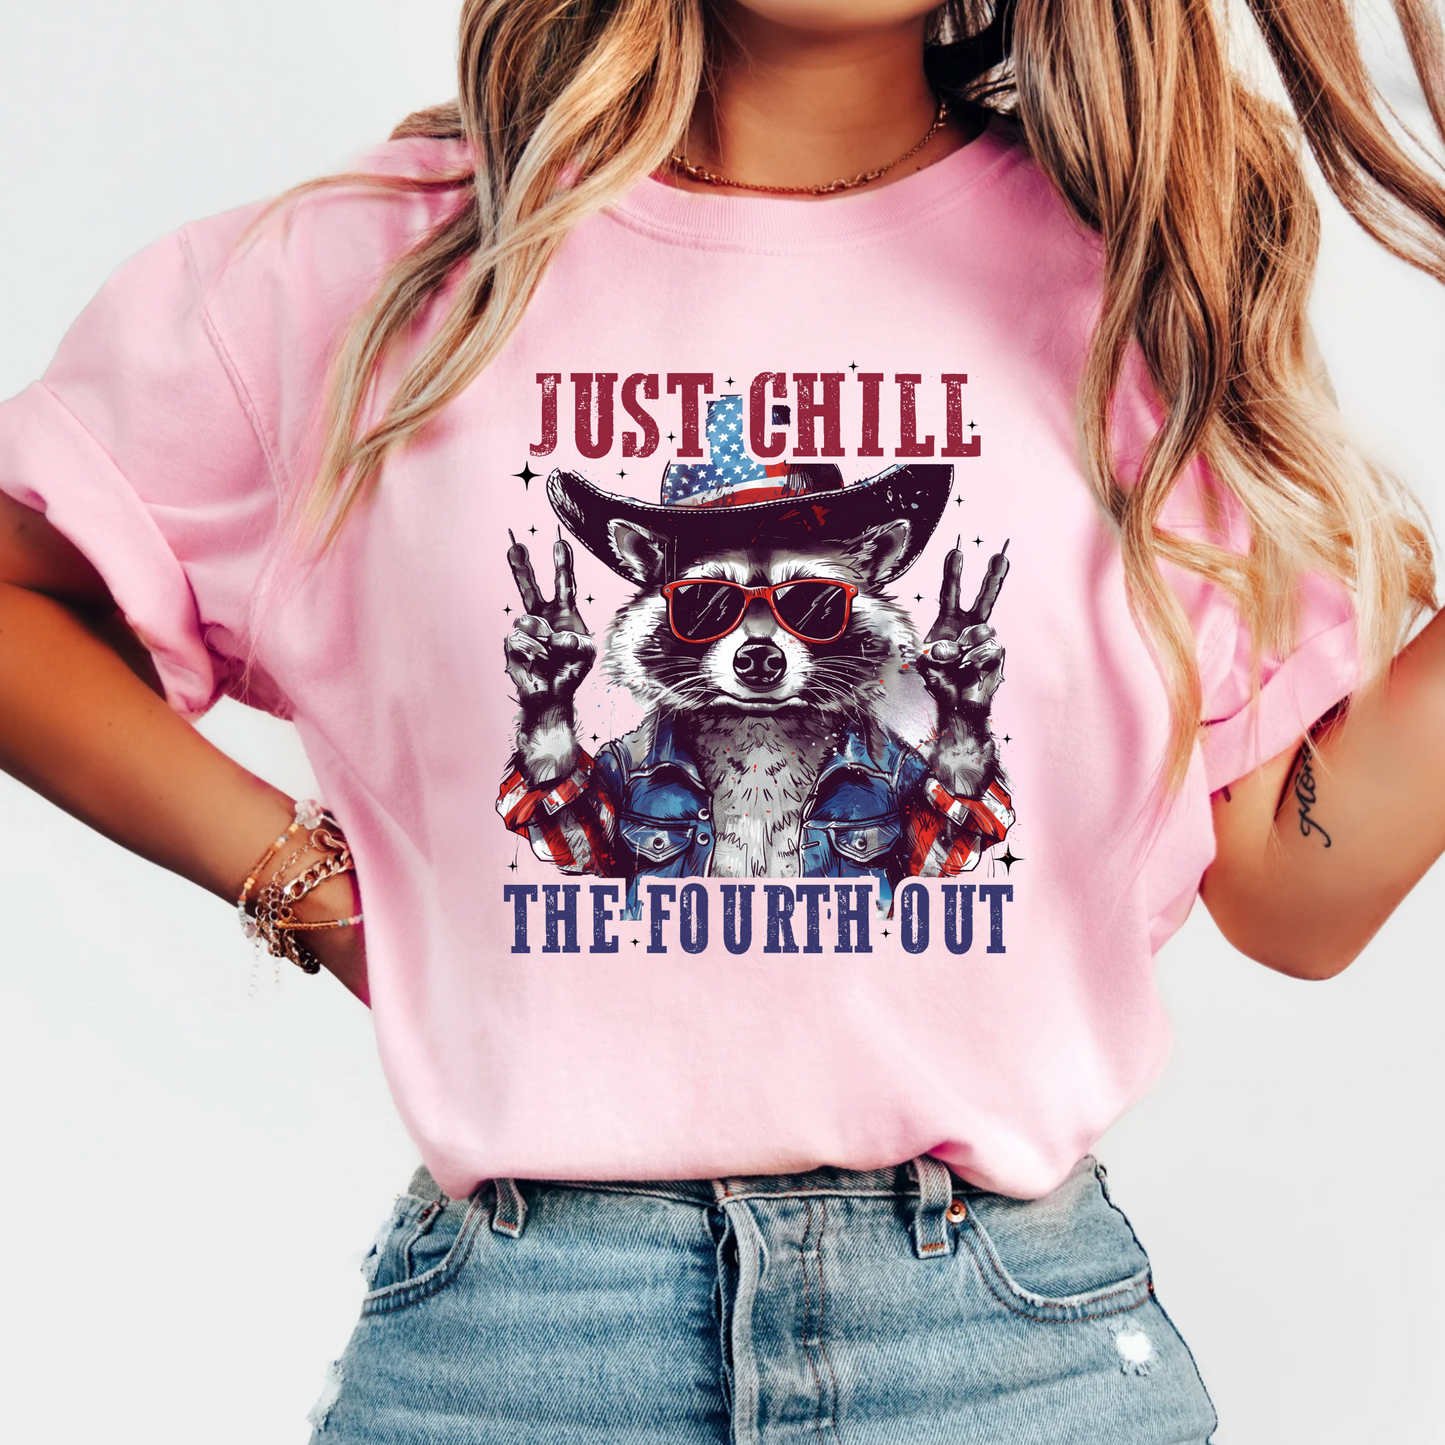 Just Chill the Fourth Out Shirt